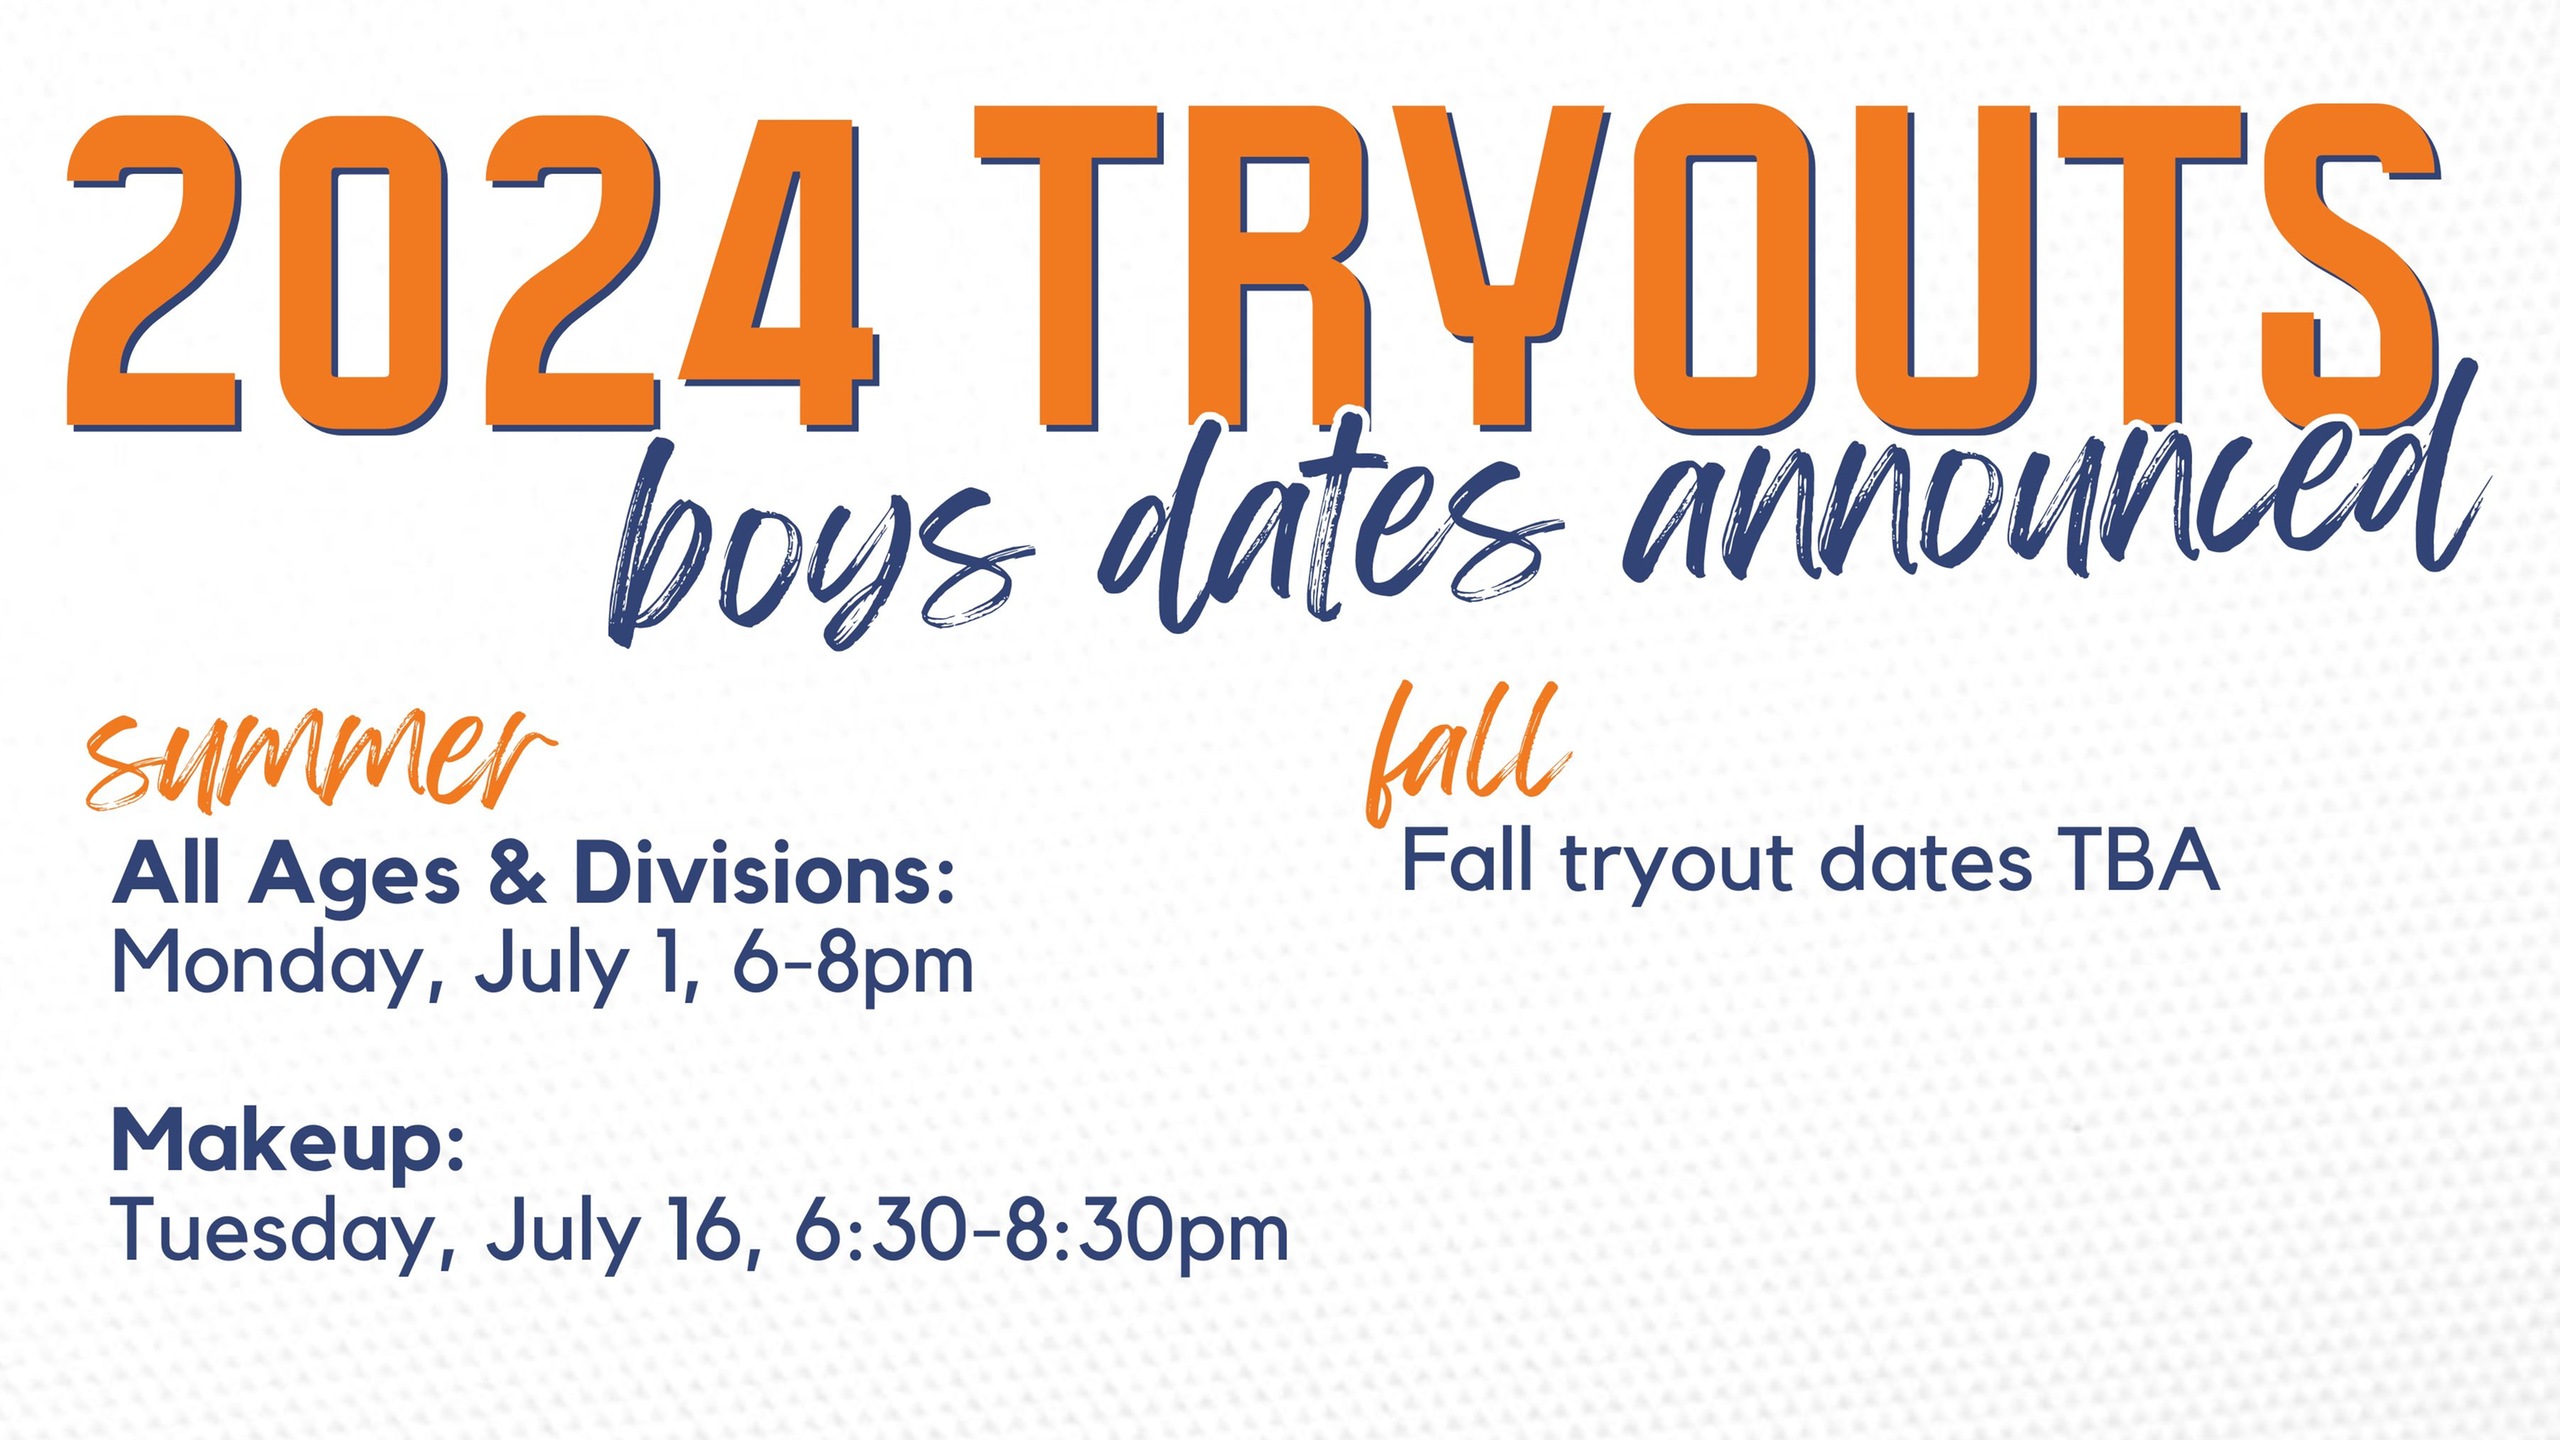 2024-25 Tentative Boys Tryout Dates Announced